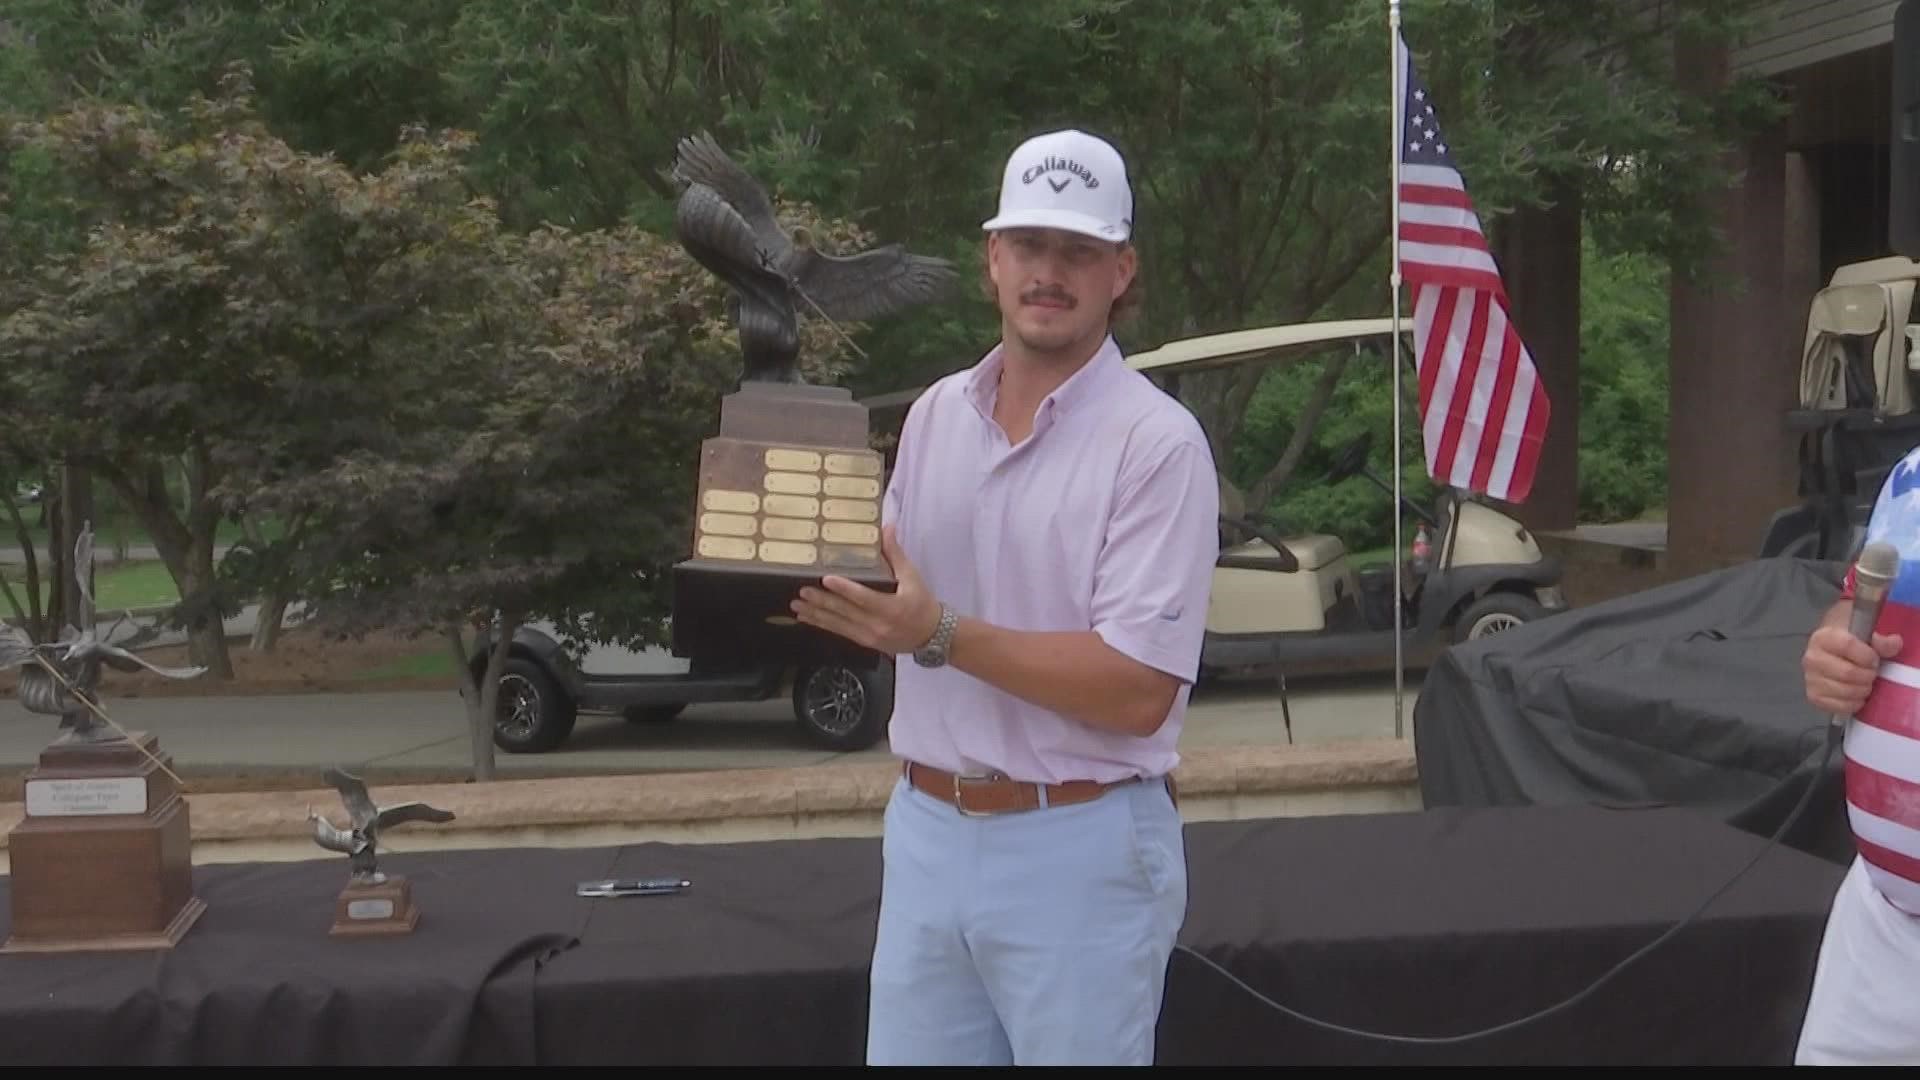 Murphy shoots 4-under par to take home the hardware.